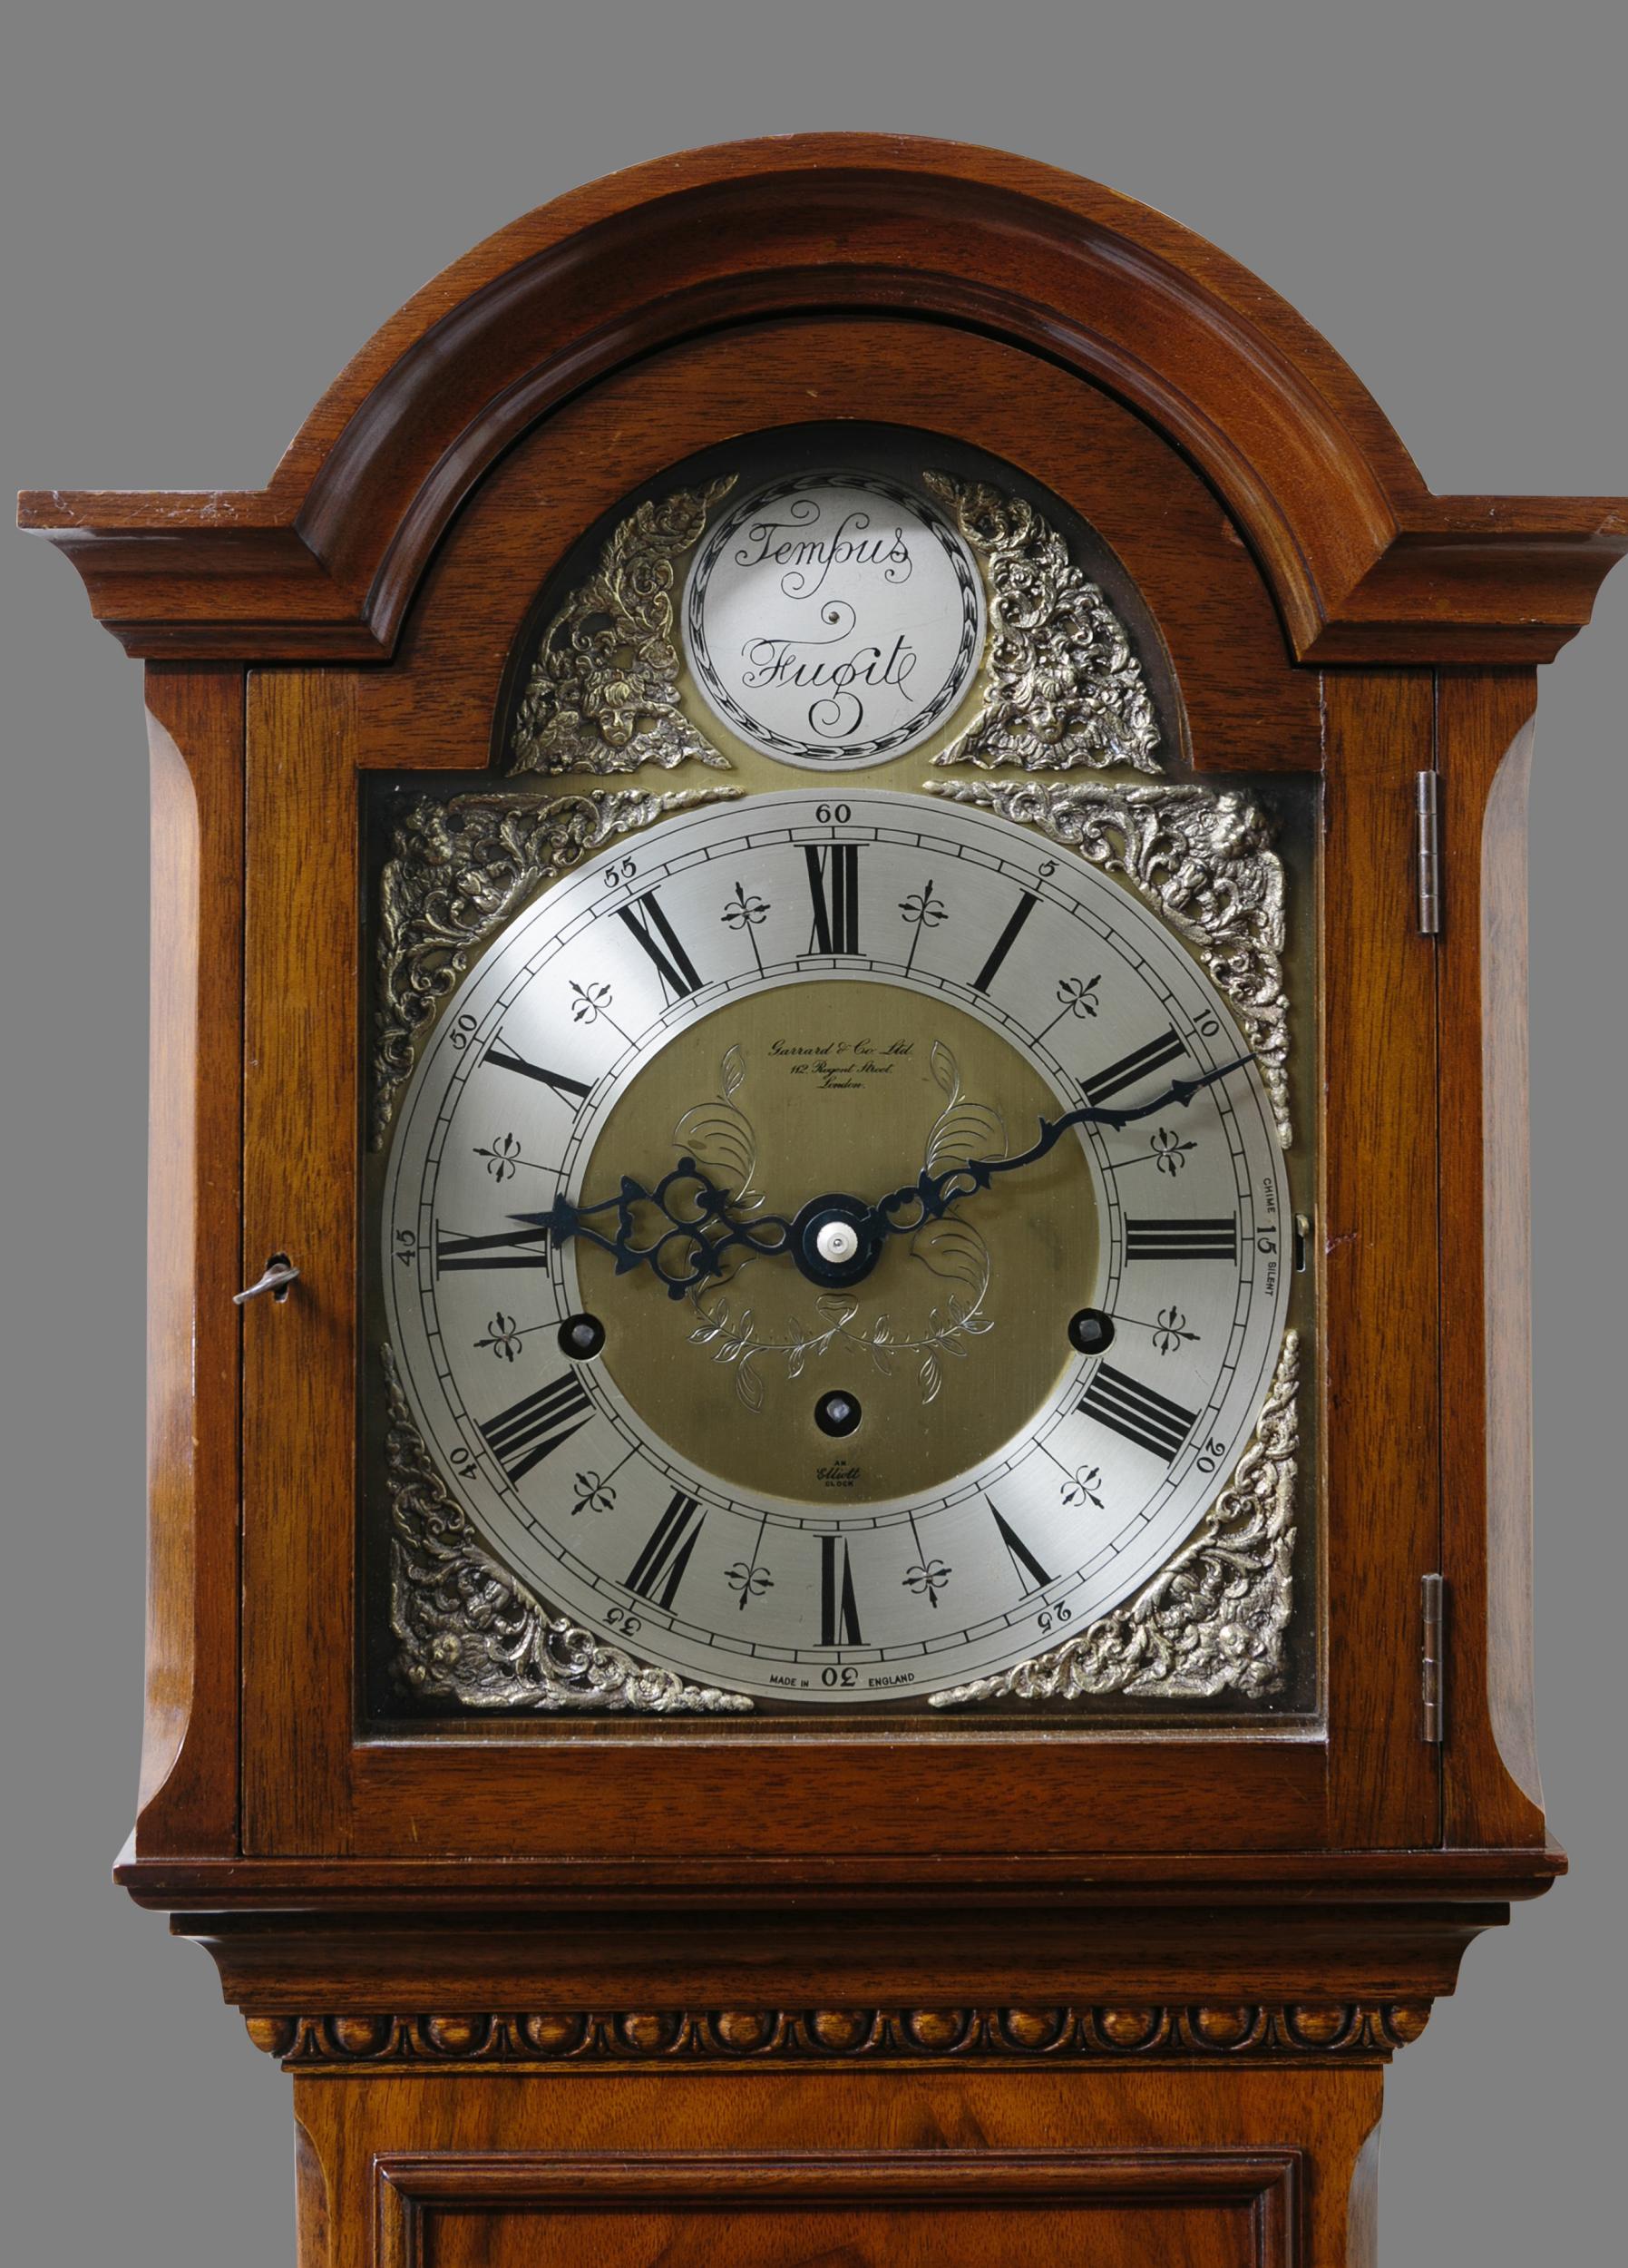 Small walnut longcase clock retailed by Garrards.

Small walnut longcase clock standing on a raised, shaped moulded plinth with applied panel to the base and carved acanthus leaf decoration.

Faux long trunk door with raised edging below the